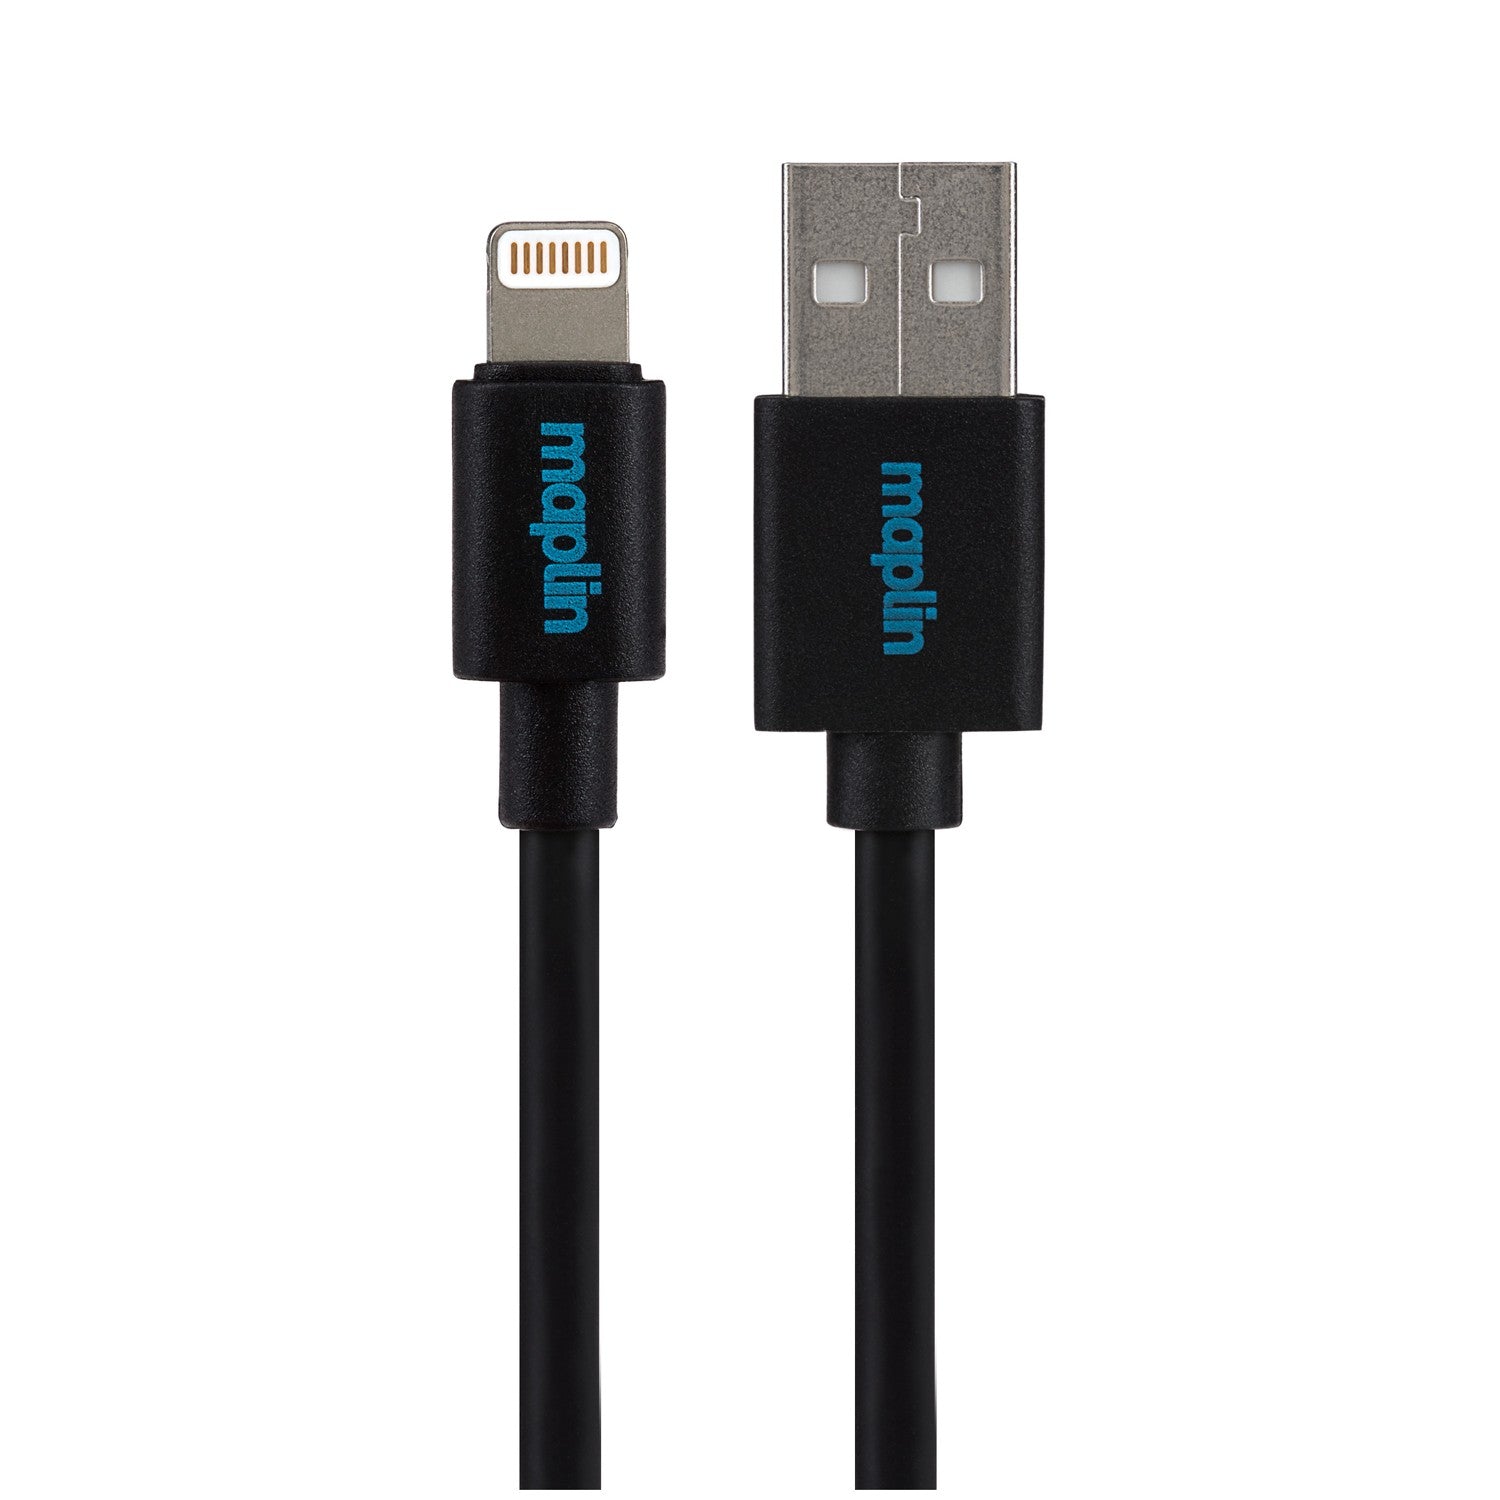 Maplin Lightning to USB-A Cable - Black, 0.5m